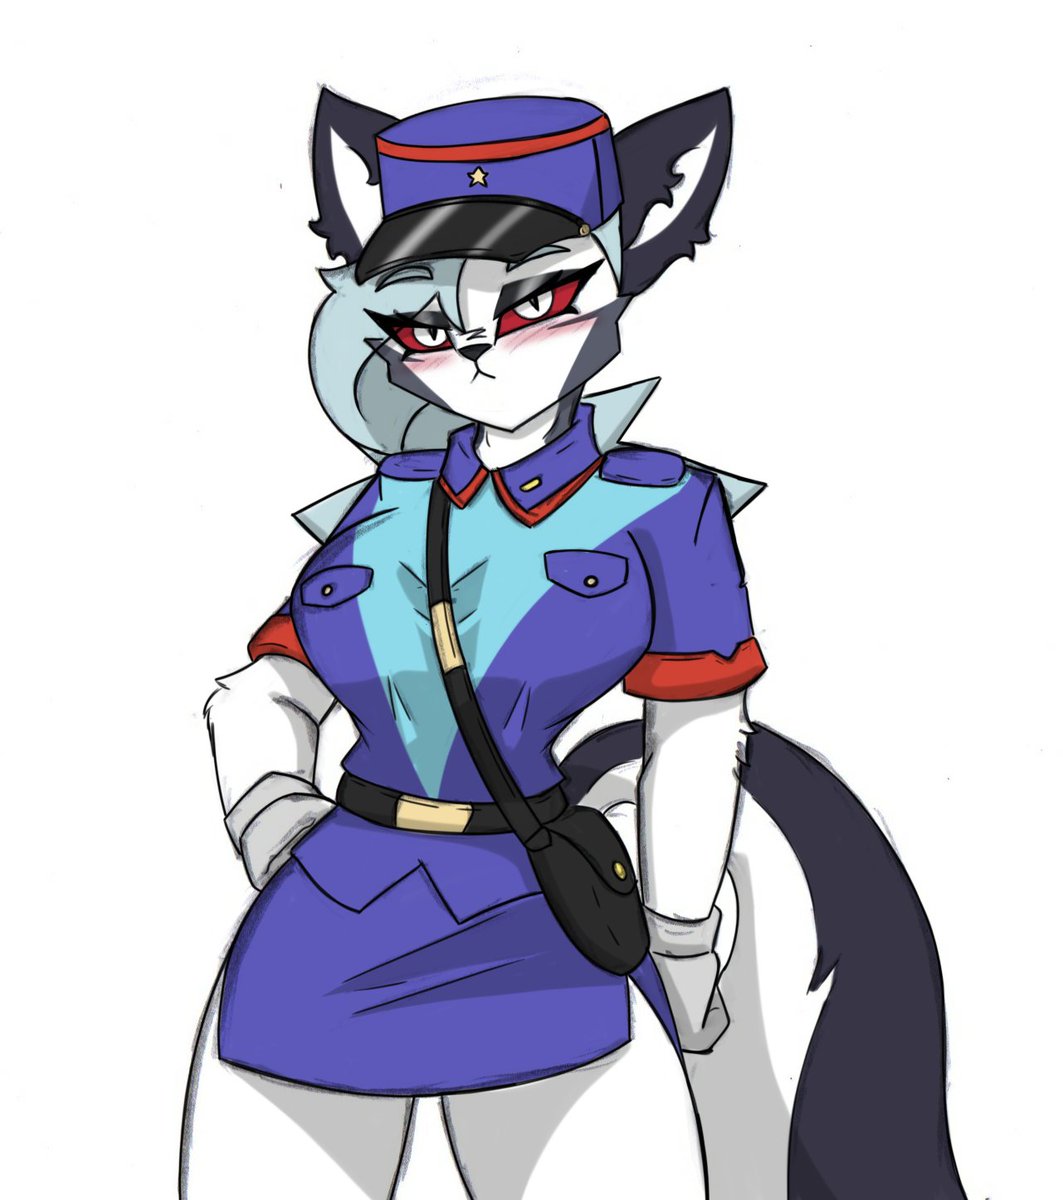 Officer Loona